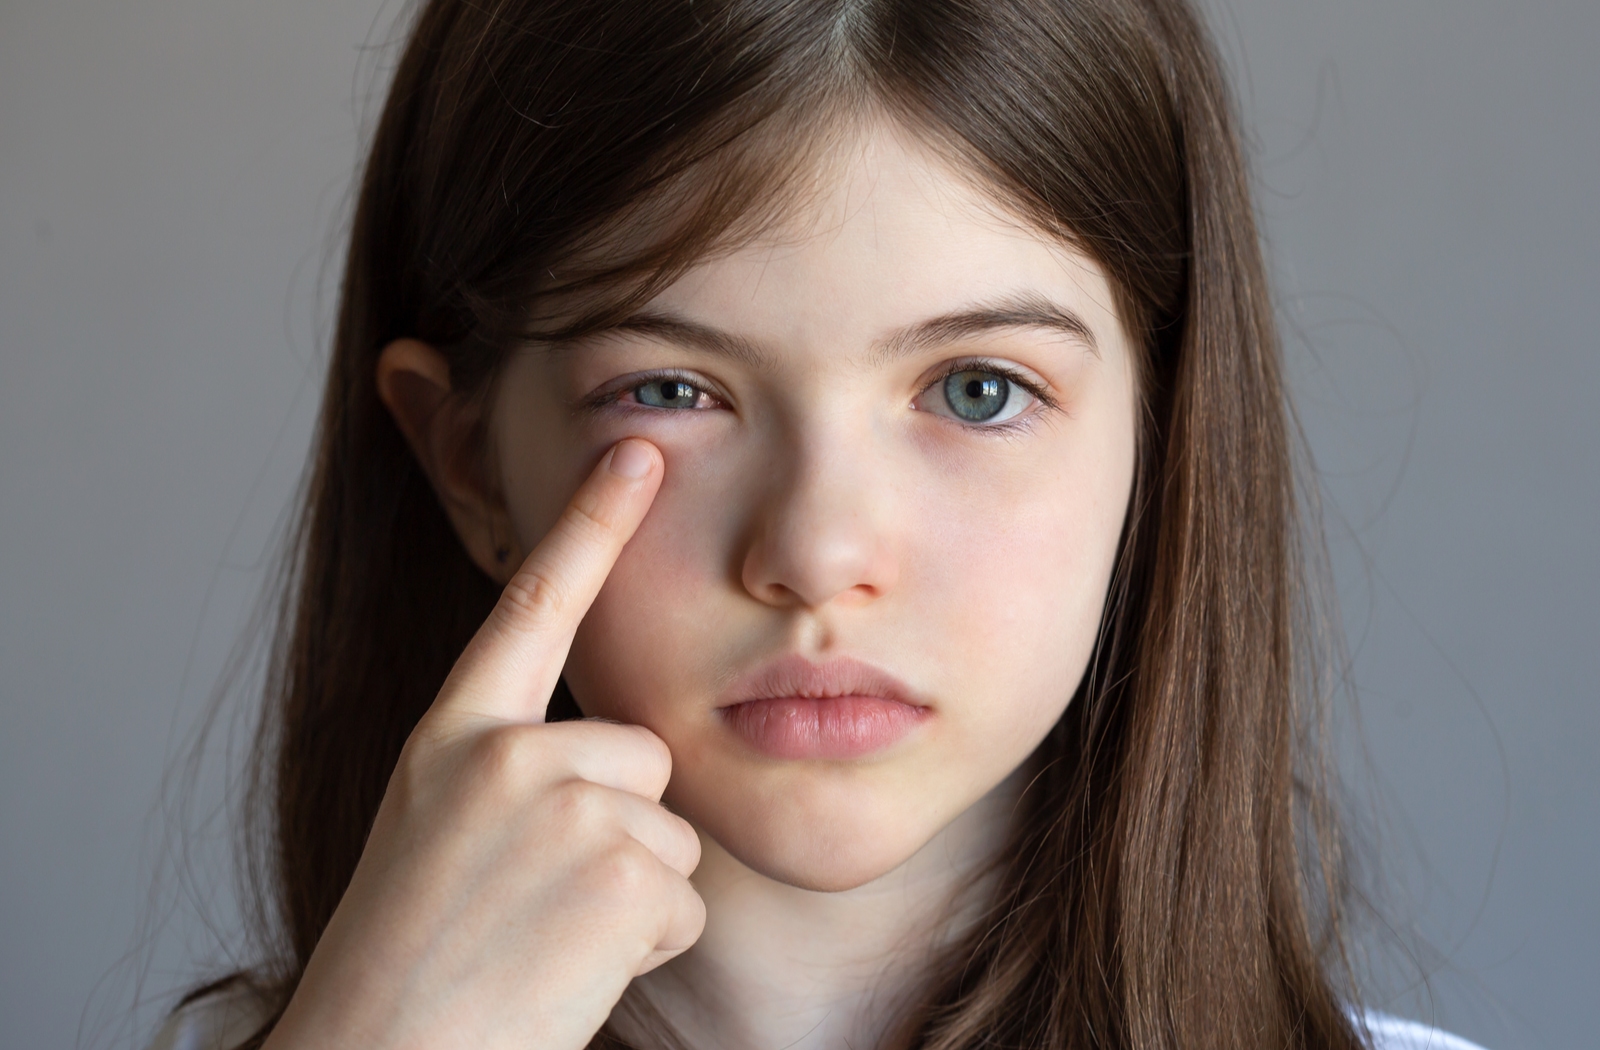 A young girl using her finger to touch just below her swollen, infected right eye